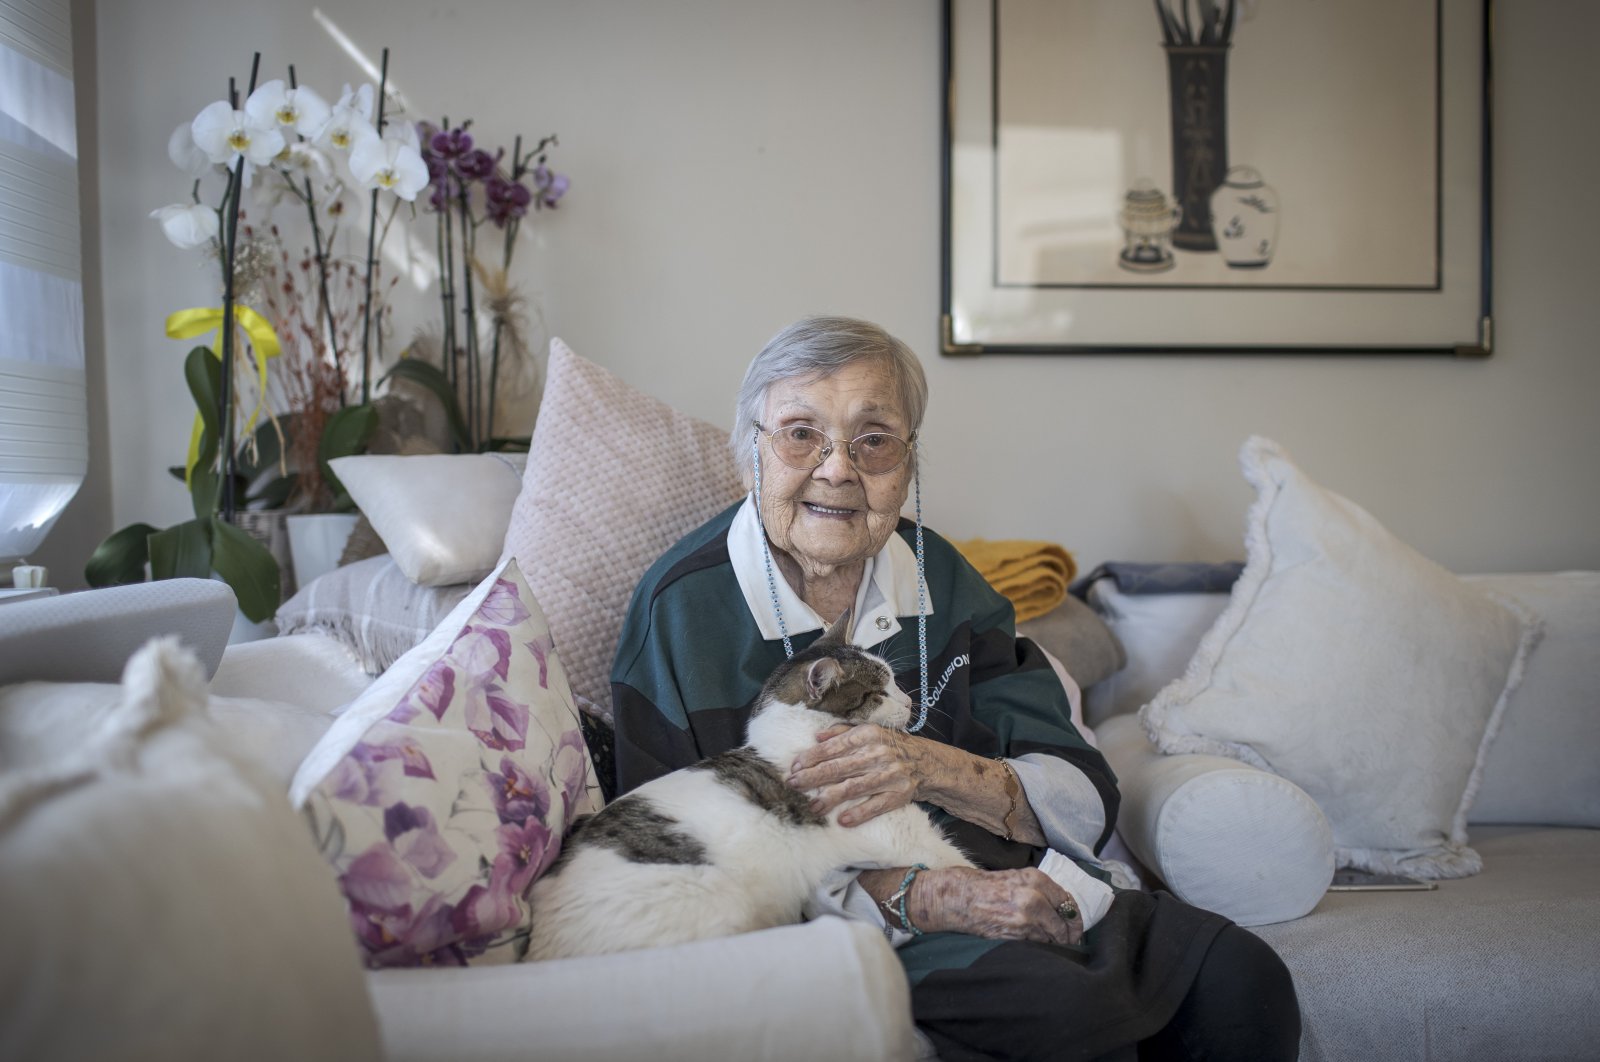 Sumerologist Muazzez Ilmiye Çığ, 108, poses with her cat at her home during an interview with Anadolu Agency, Mersin, southern Turkey, Dec. 24, 2021. (AA)